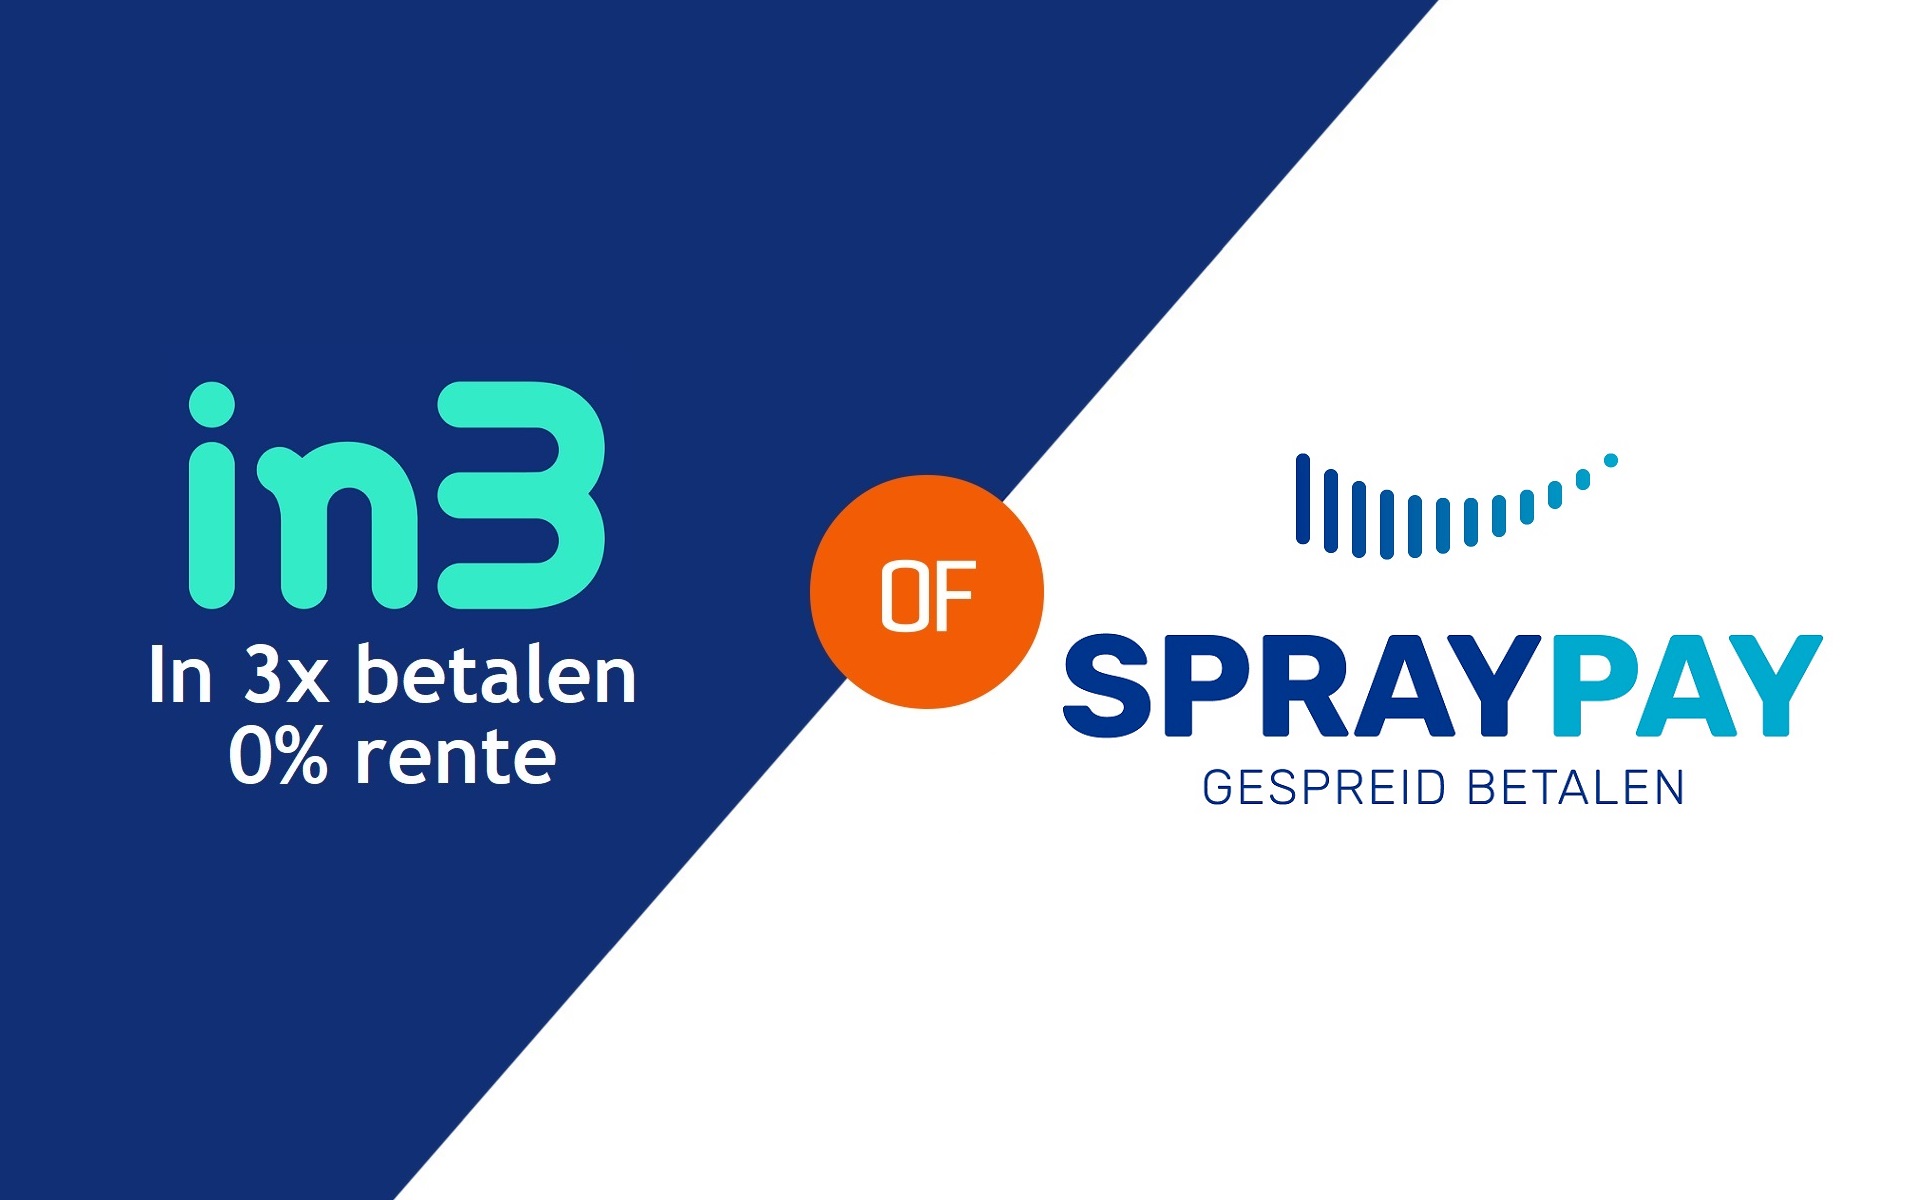 Would you rather pay for your purchase in installments? That’s possible with IN3 and SprayPay!